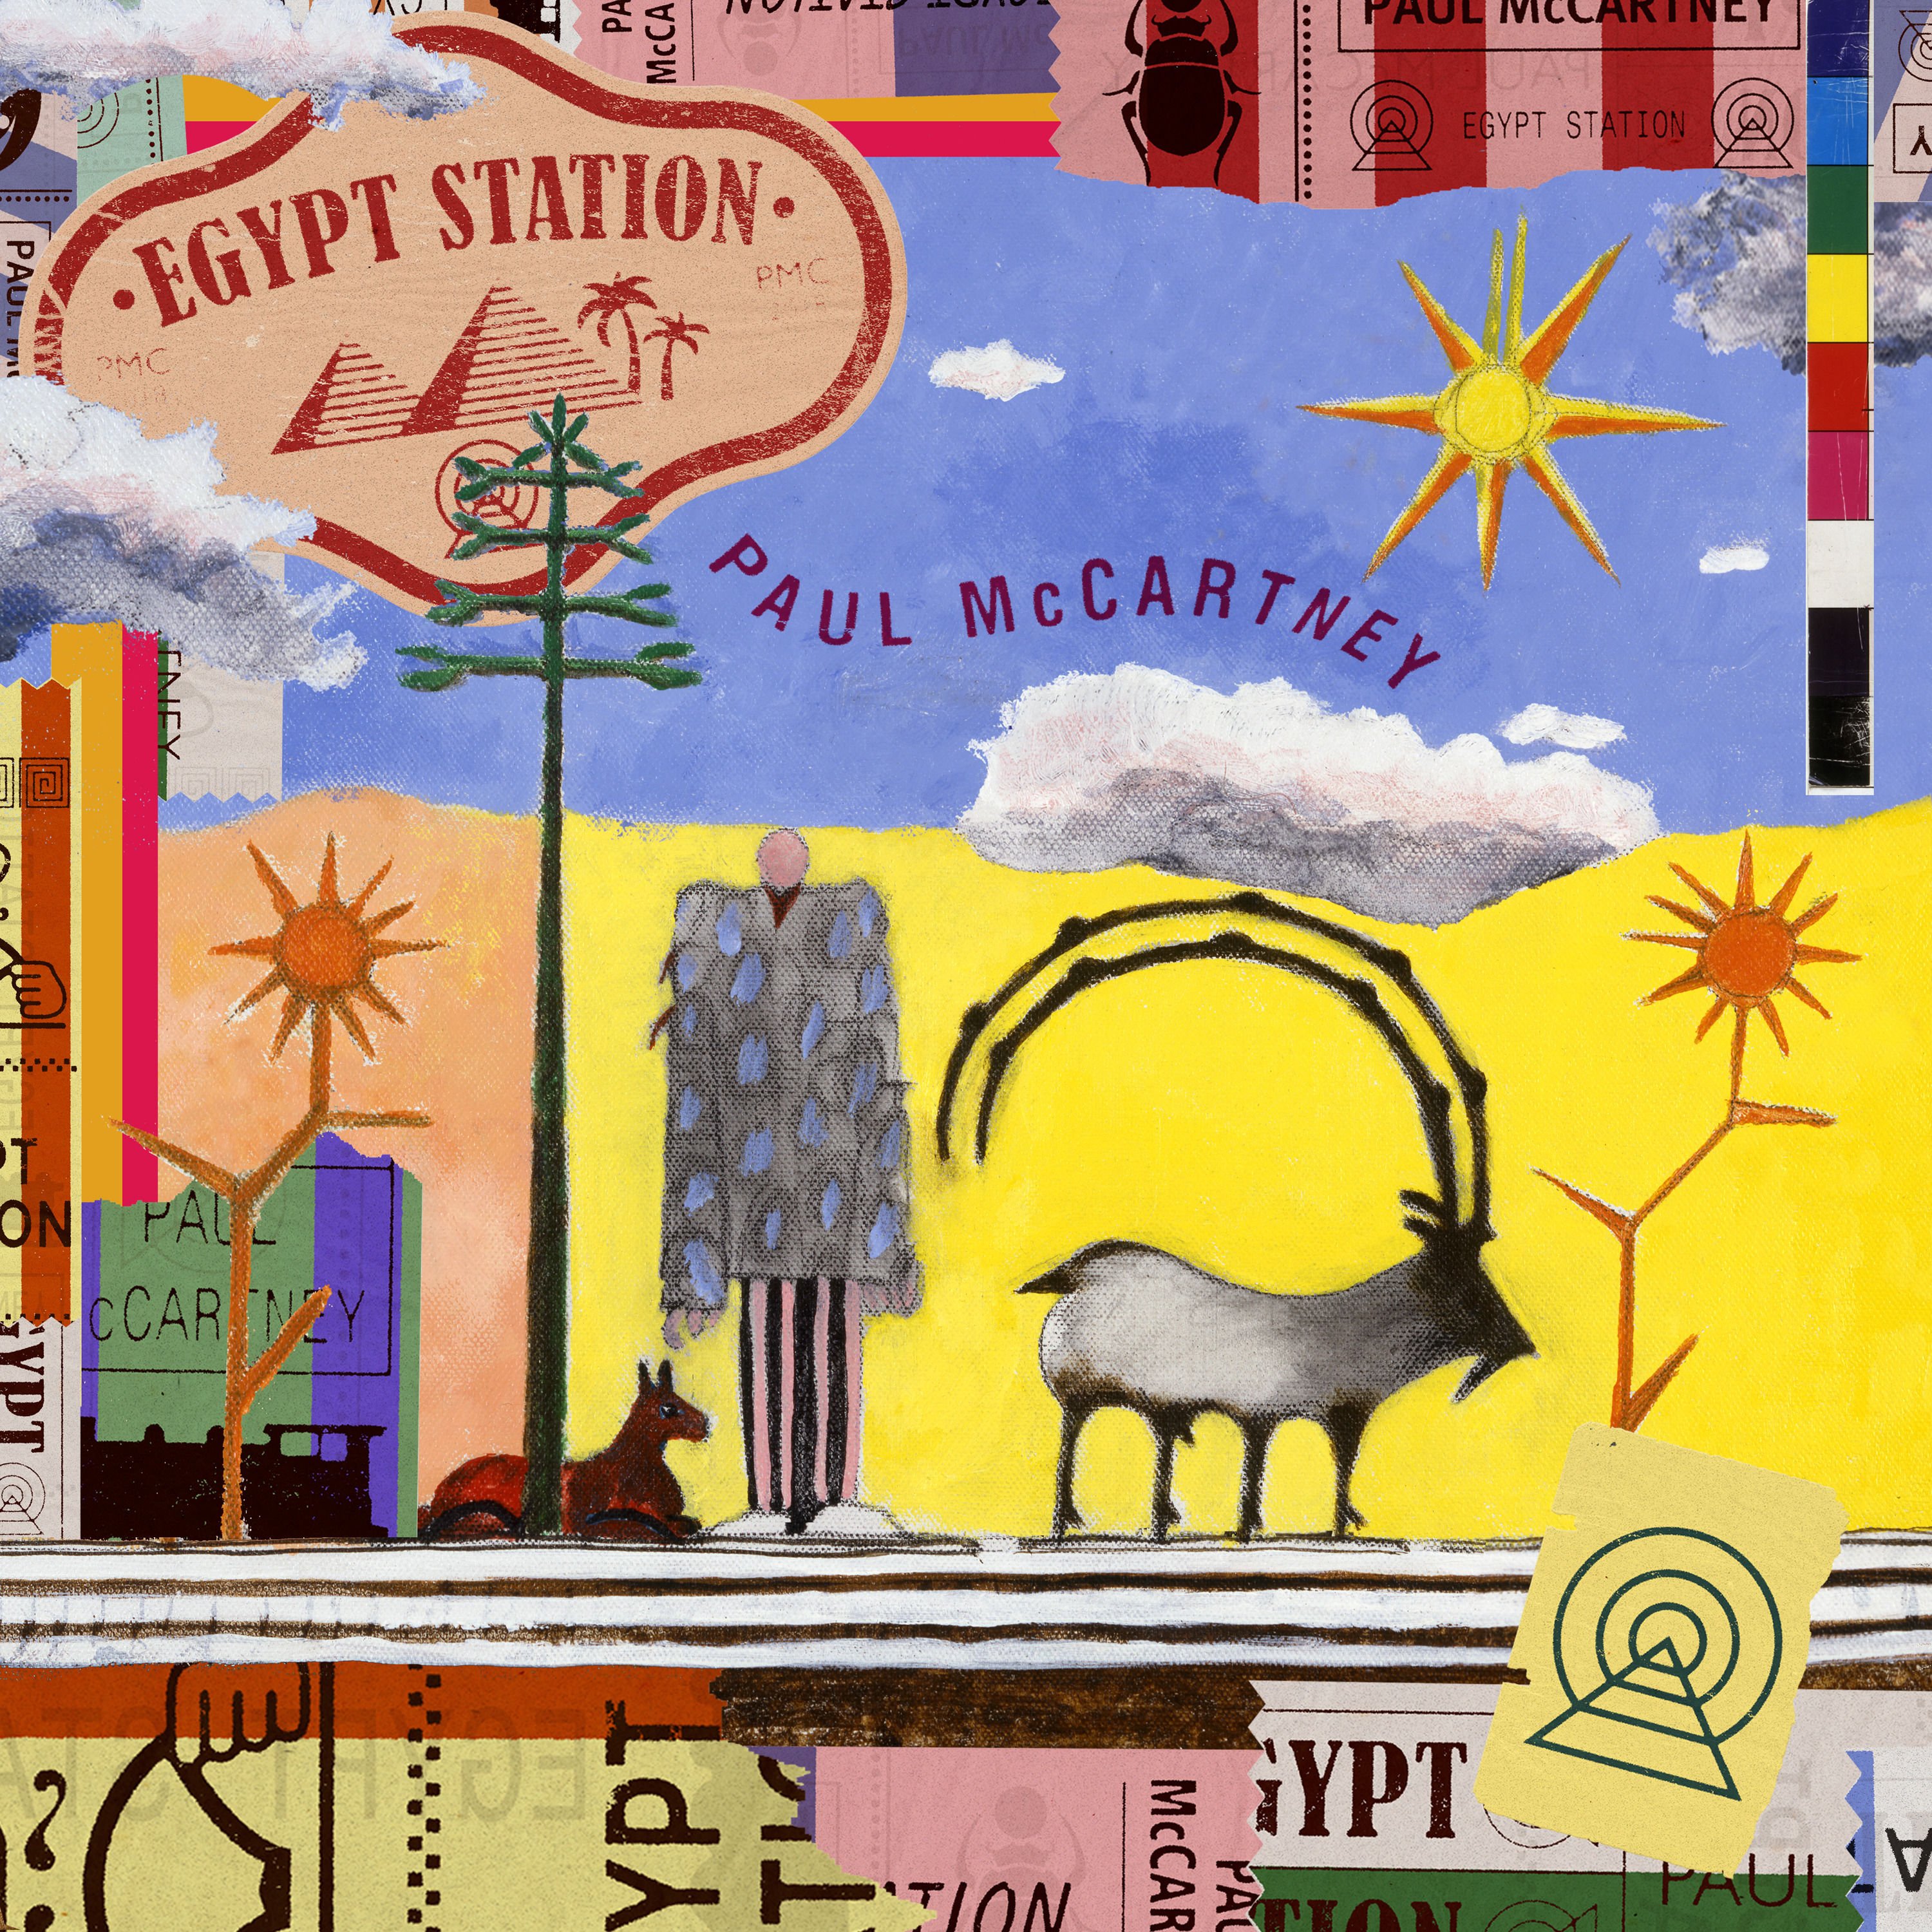 Paul McCartney-Egypt Station-24-96-WEB-FLAC-REMASTERED DELUXE EDITION-2019-OBZEN Download